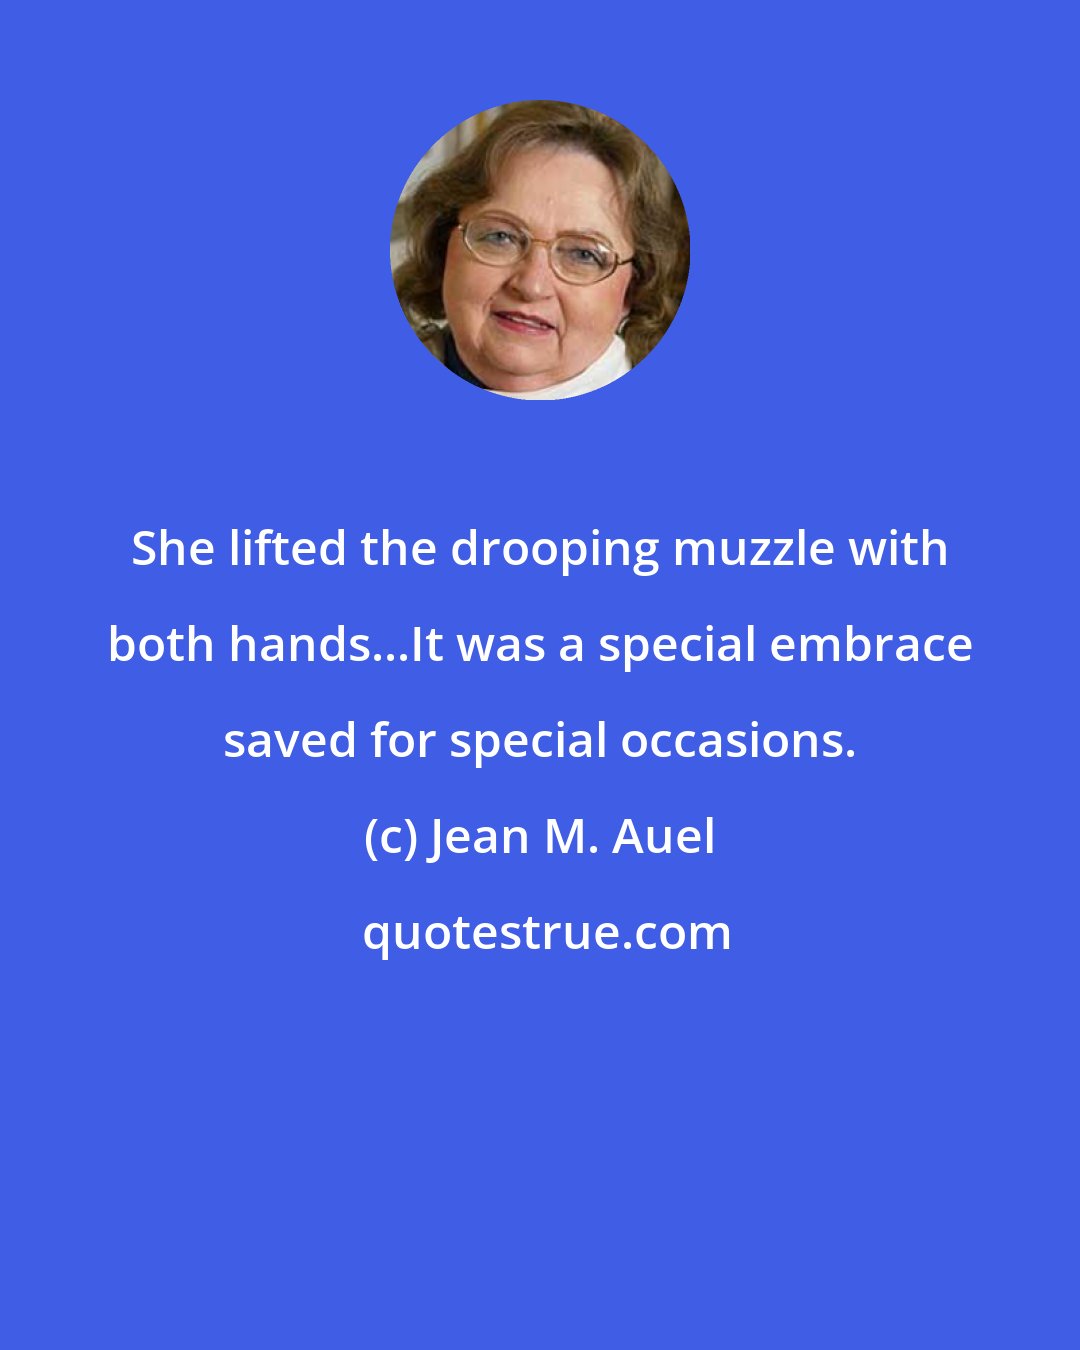 Jean M. Auel: She lifted the drooping muzzle with both hands...It was a special embrace saved for special occasions.